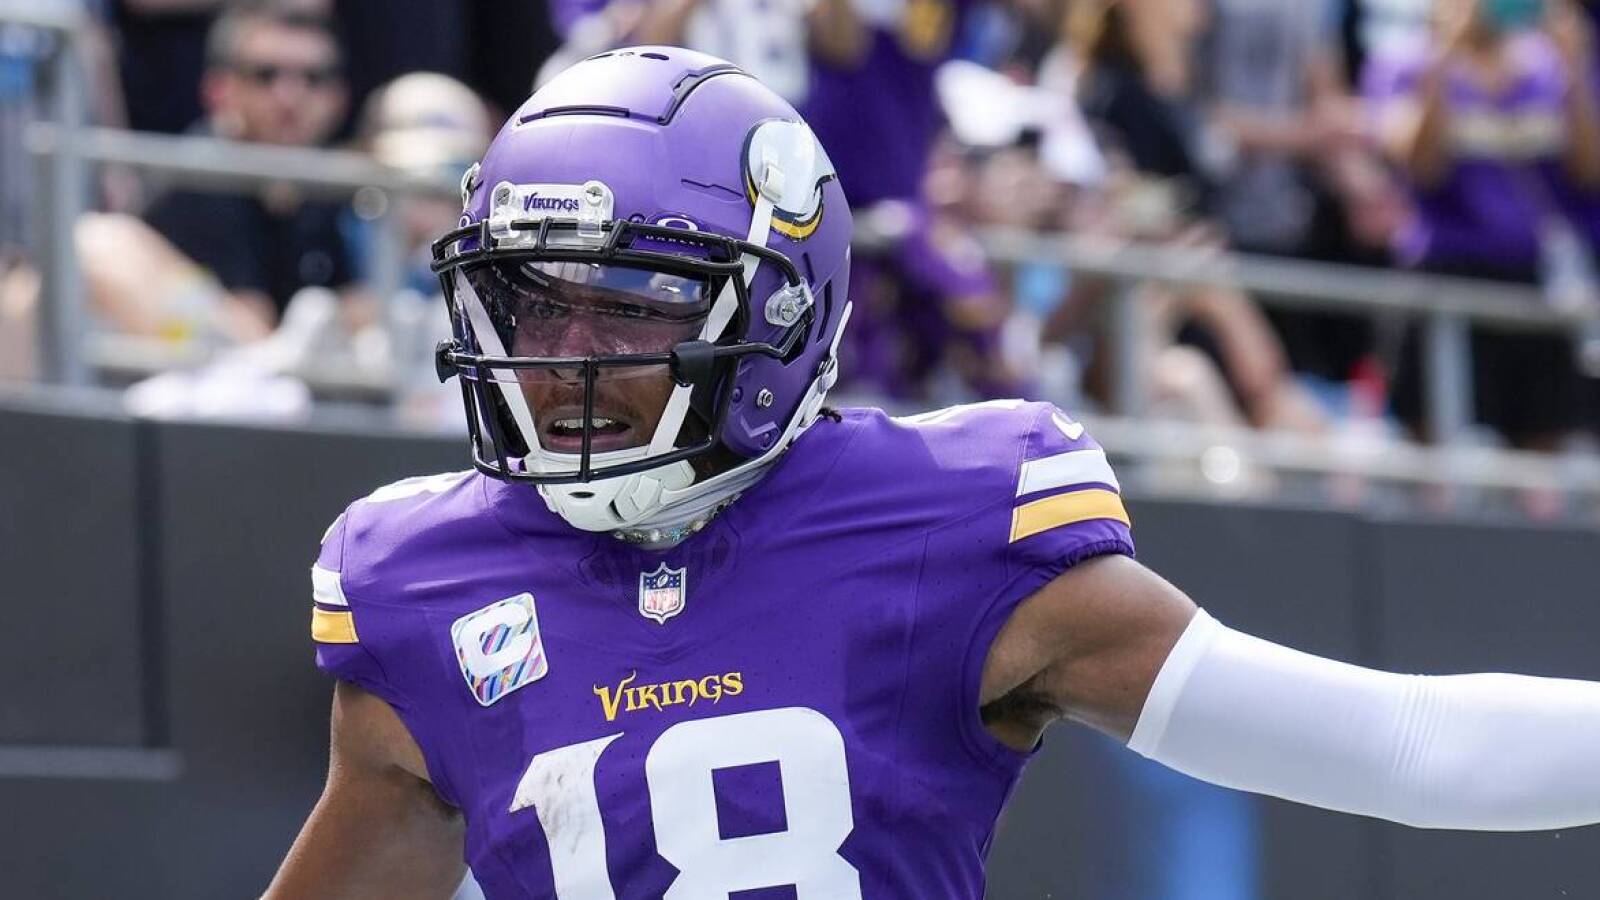 Insider suggests Vikings could include Justin Jefferson in draft trade